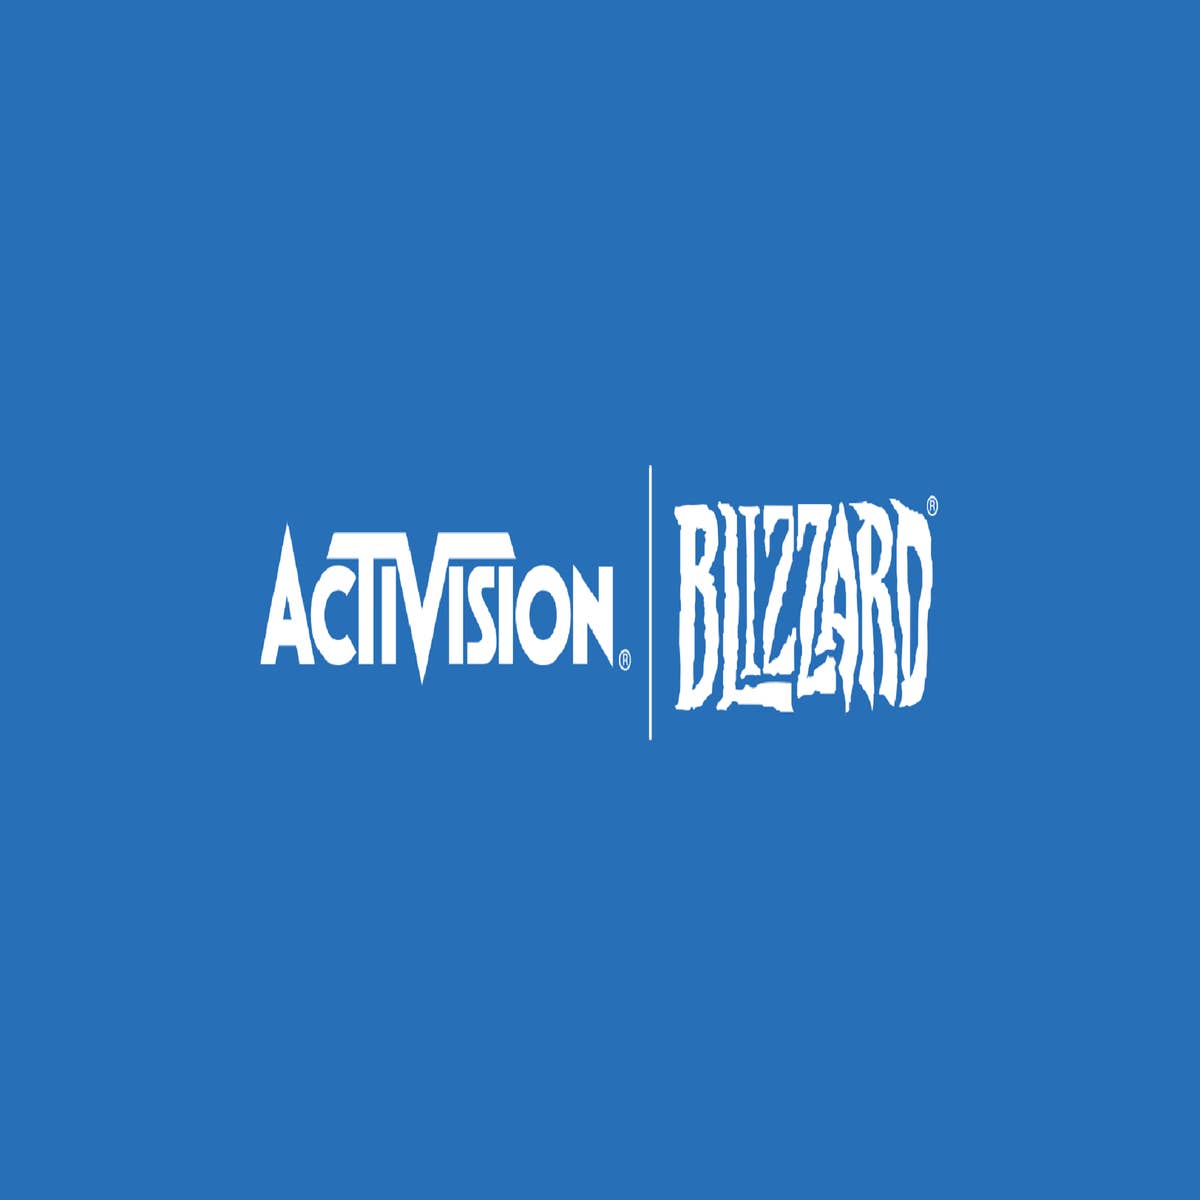 What games buying Activision Blizzard could get Xbox - The Verge